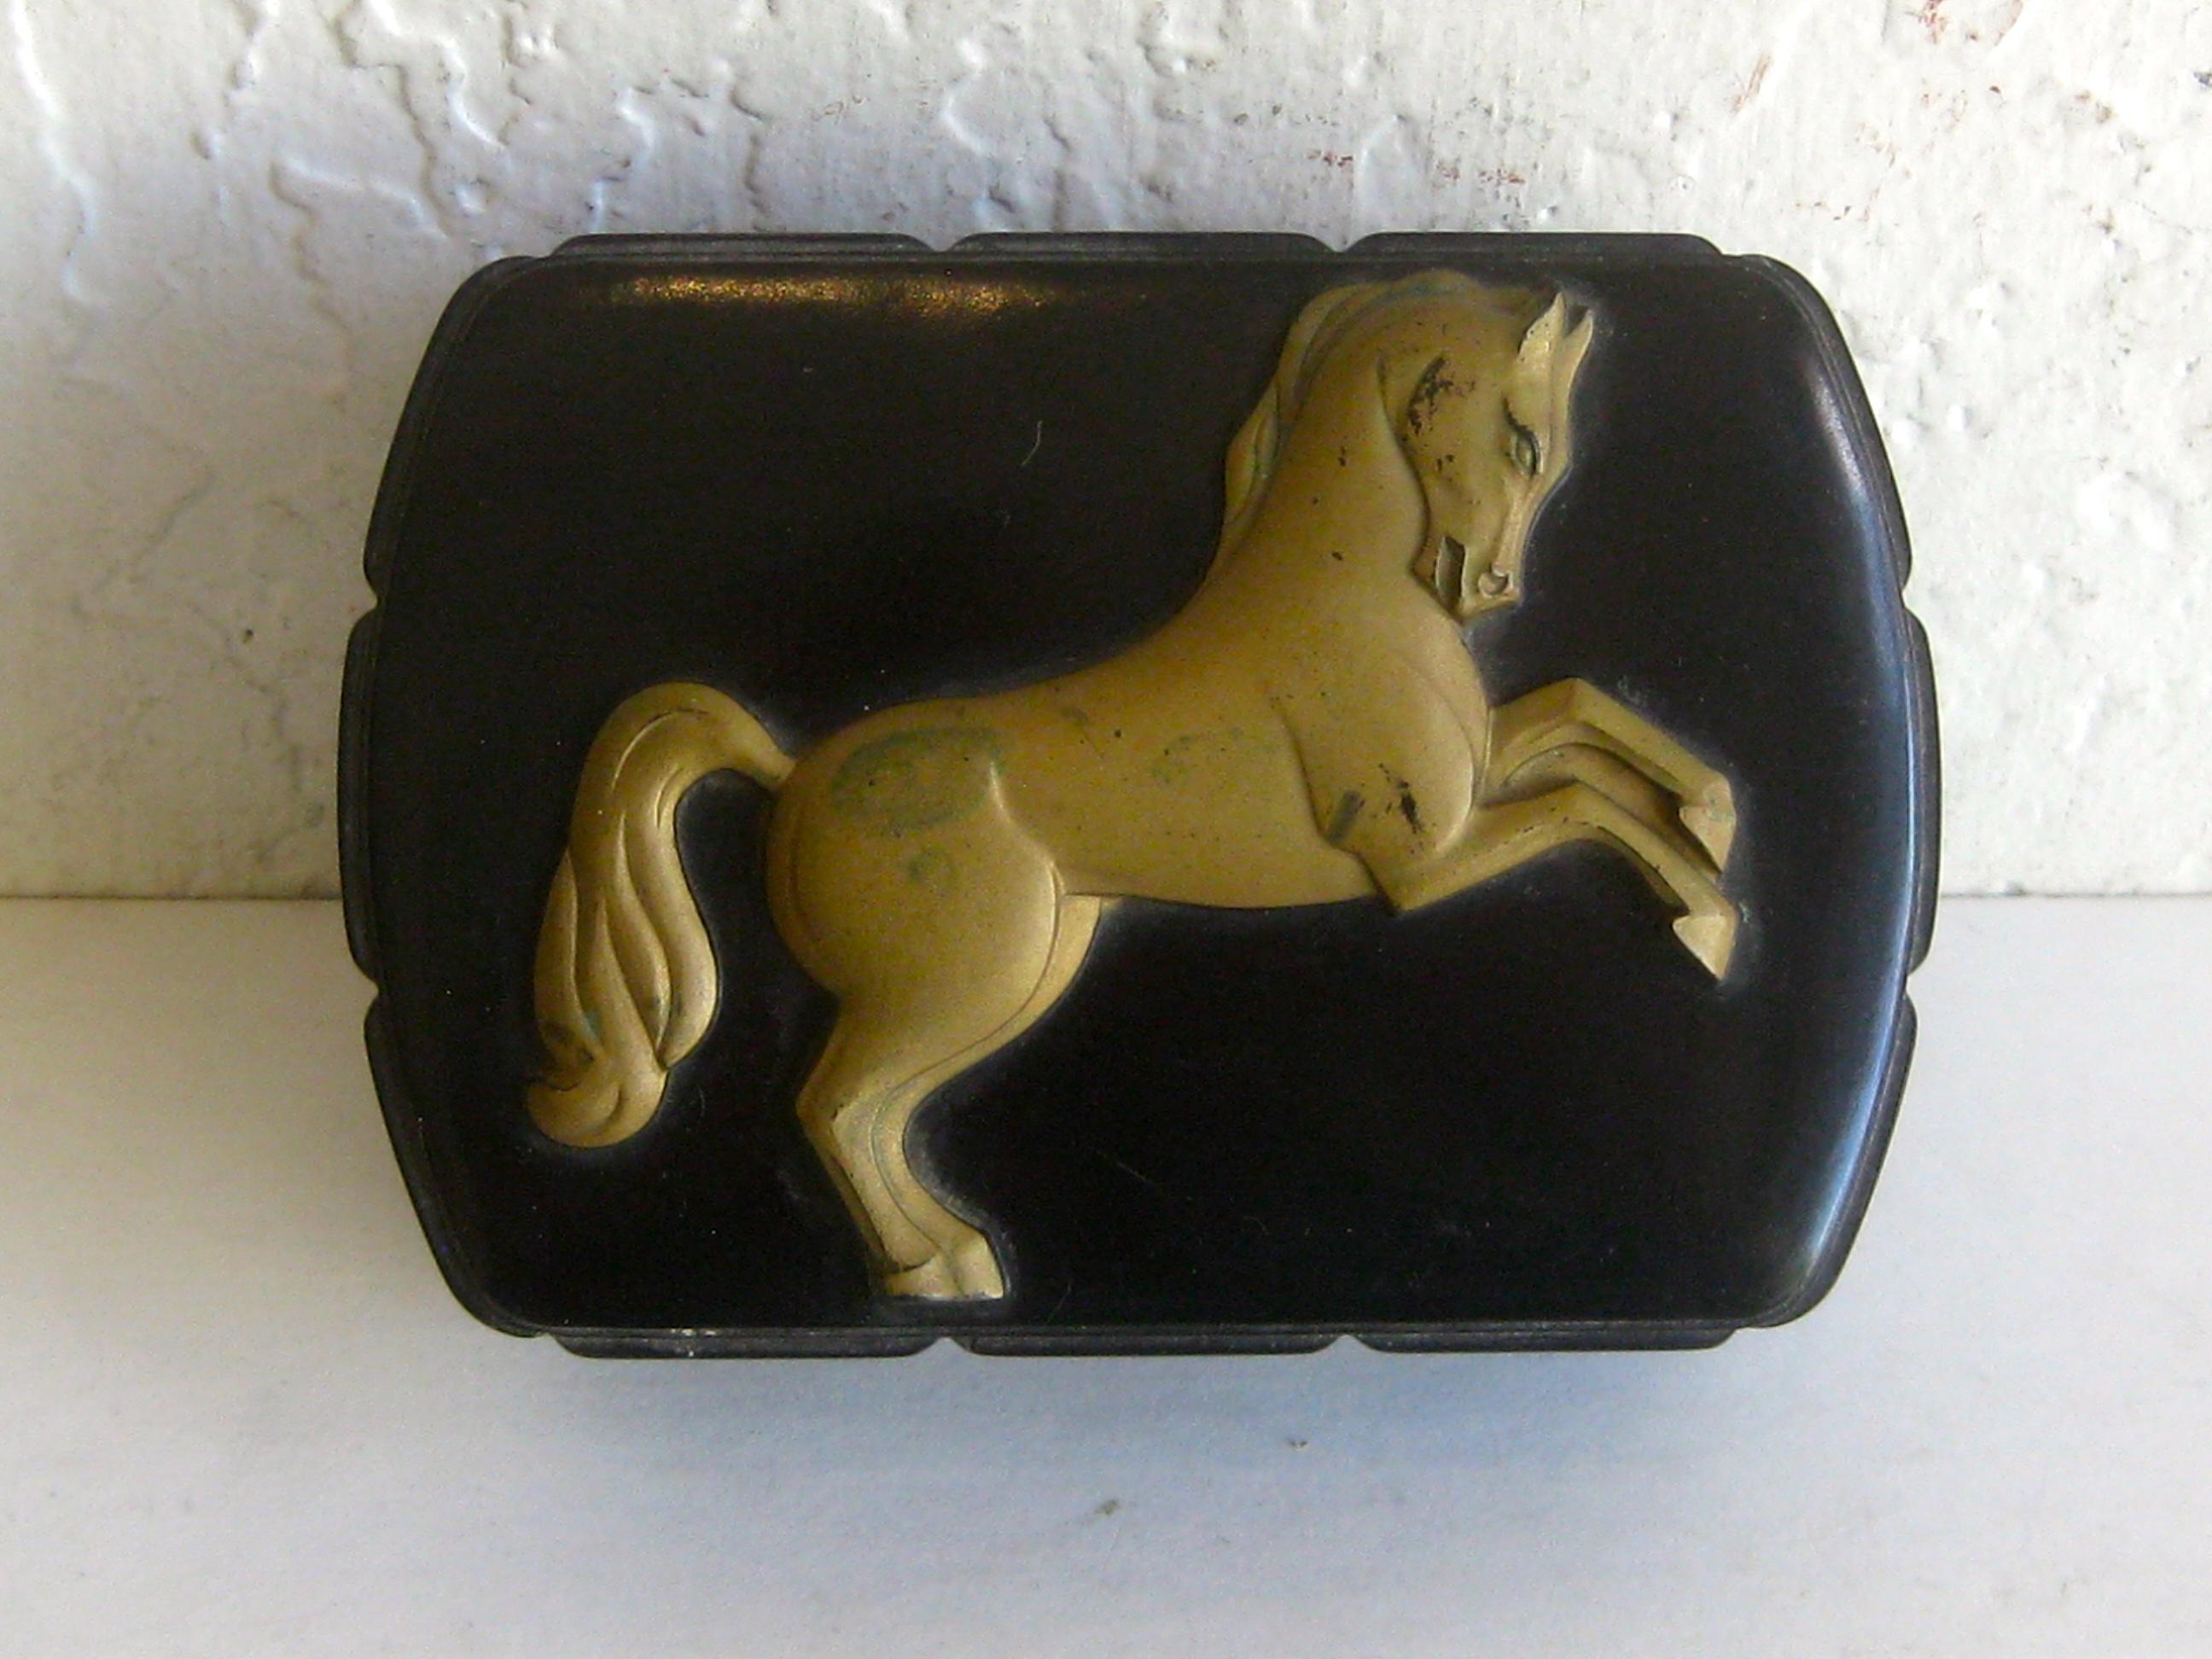 Wonderful original Art Deco black bakelite trinket/stash cigarette box made by Hickok and dates from the 1930s. Has a decorative horse on top and applied gold paint. Marked by the maker on the inside. In nice original condition. Light wear to the